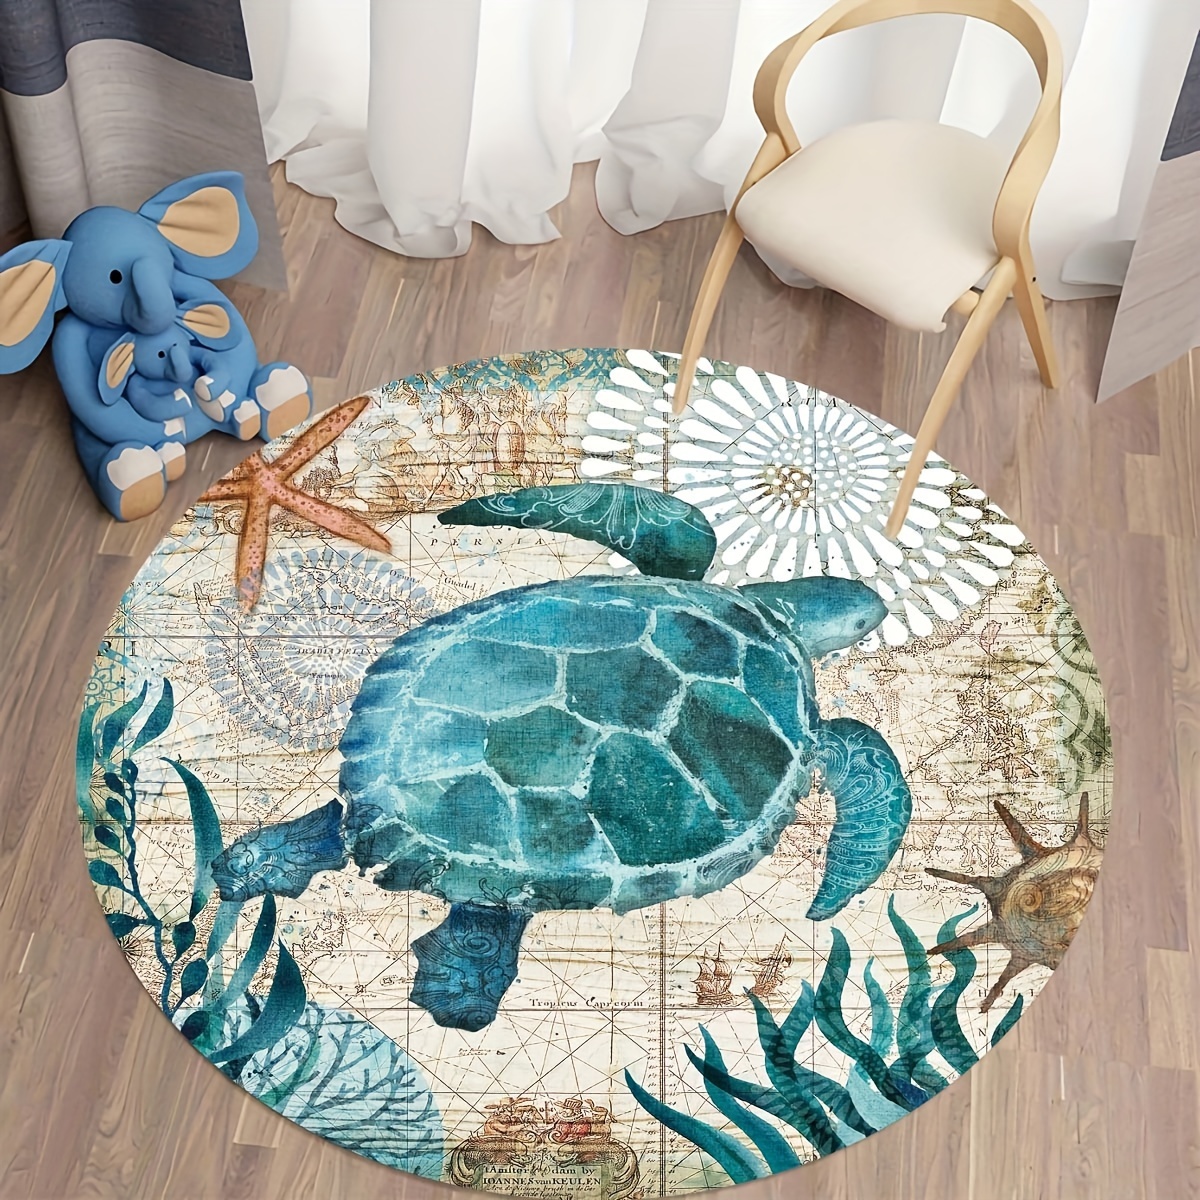 

Round Turtle Design Area Rug, Machine Washable Polyester Non-slip Absorbent Mat For Bedroom, Porch - 80cm And 120cm Diameter Options